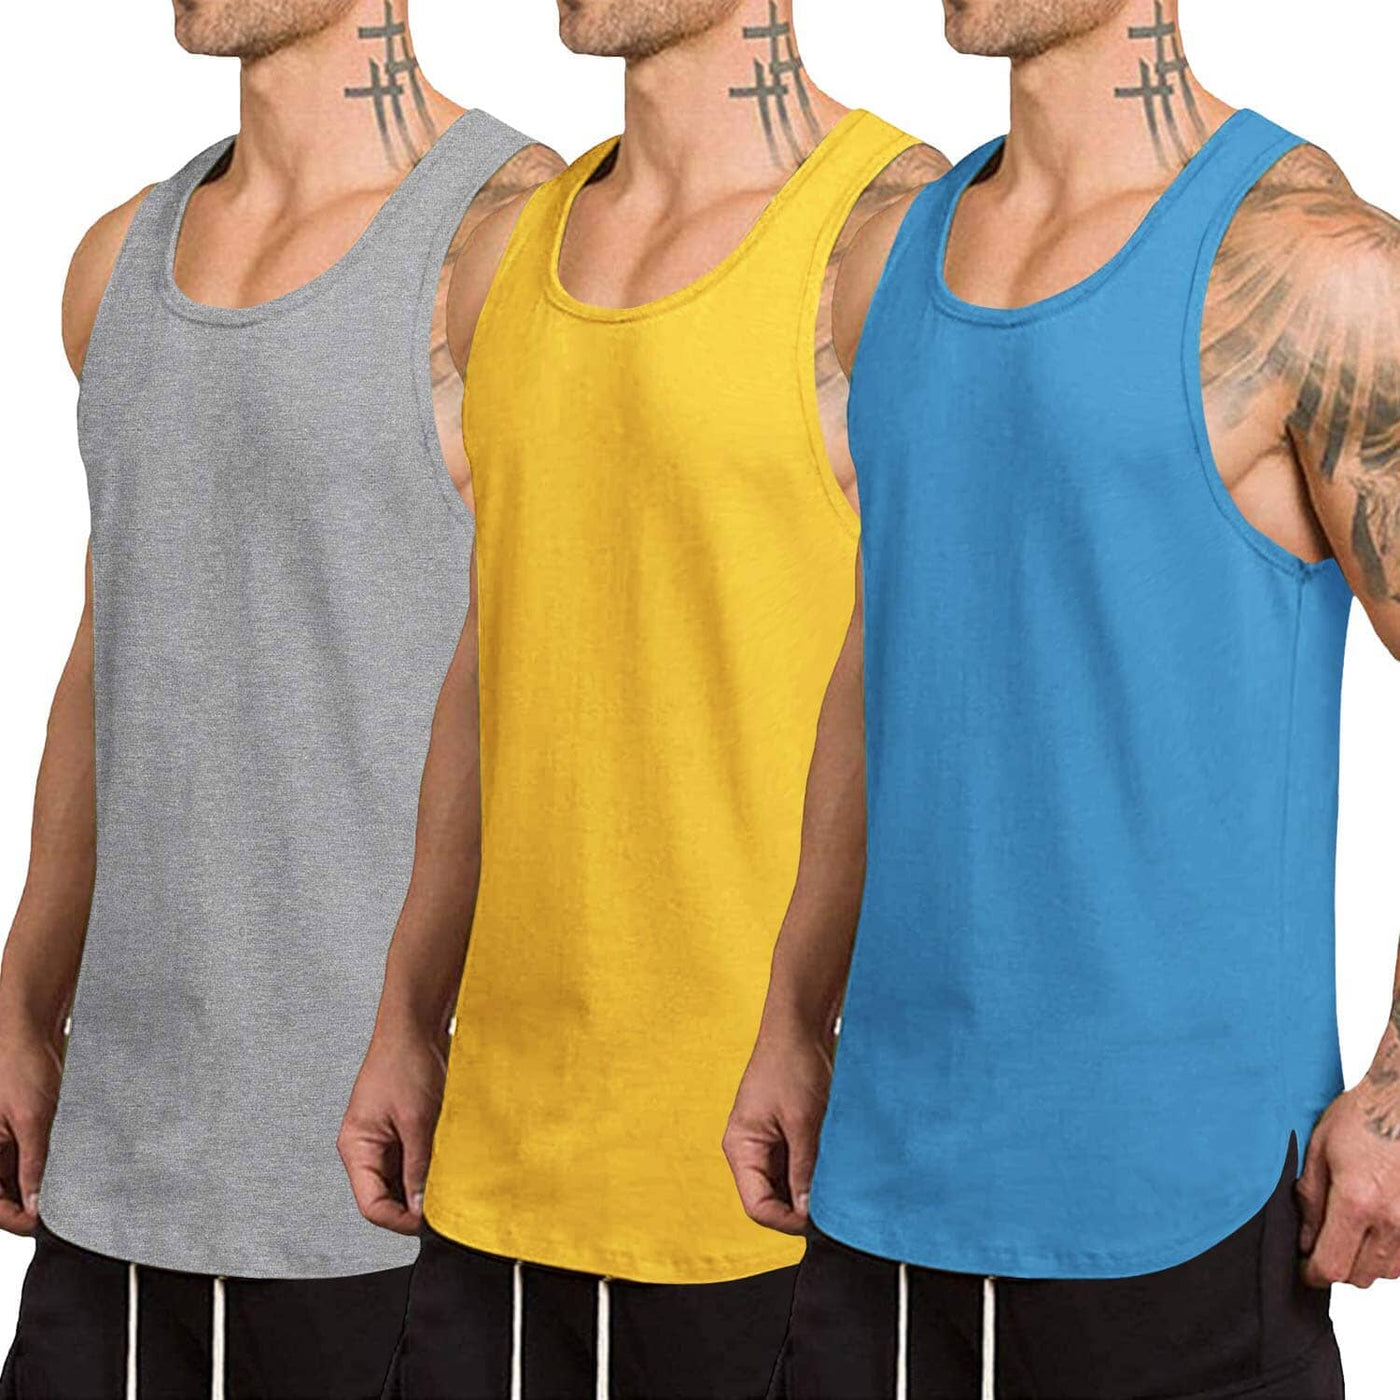 Coofandy 3-Pack Quick Dry Gym Vest (US Only) Tank Tops coofandy Blue/Light Grey/Yellow S 